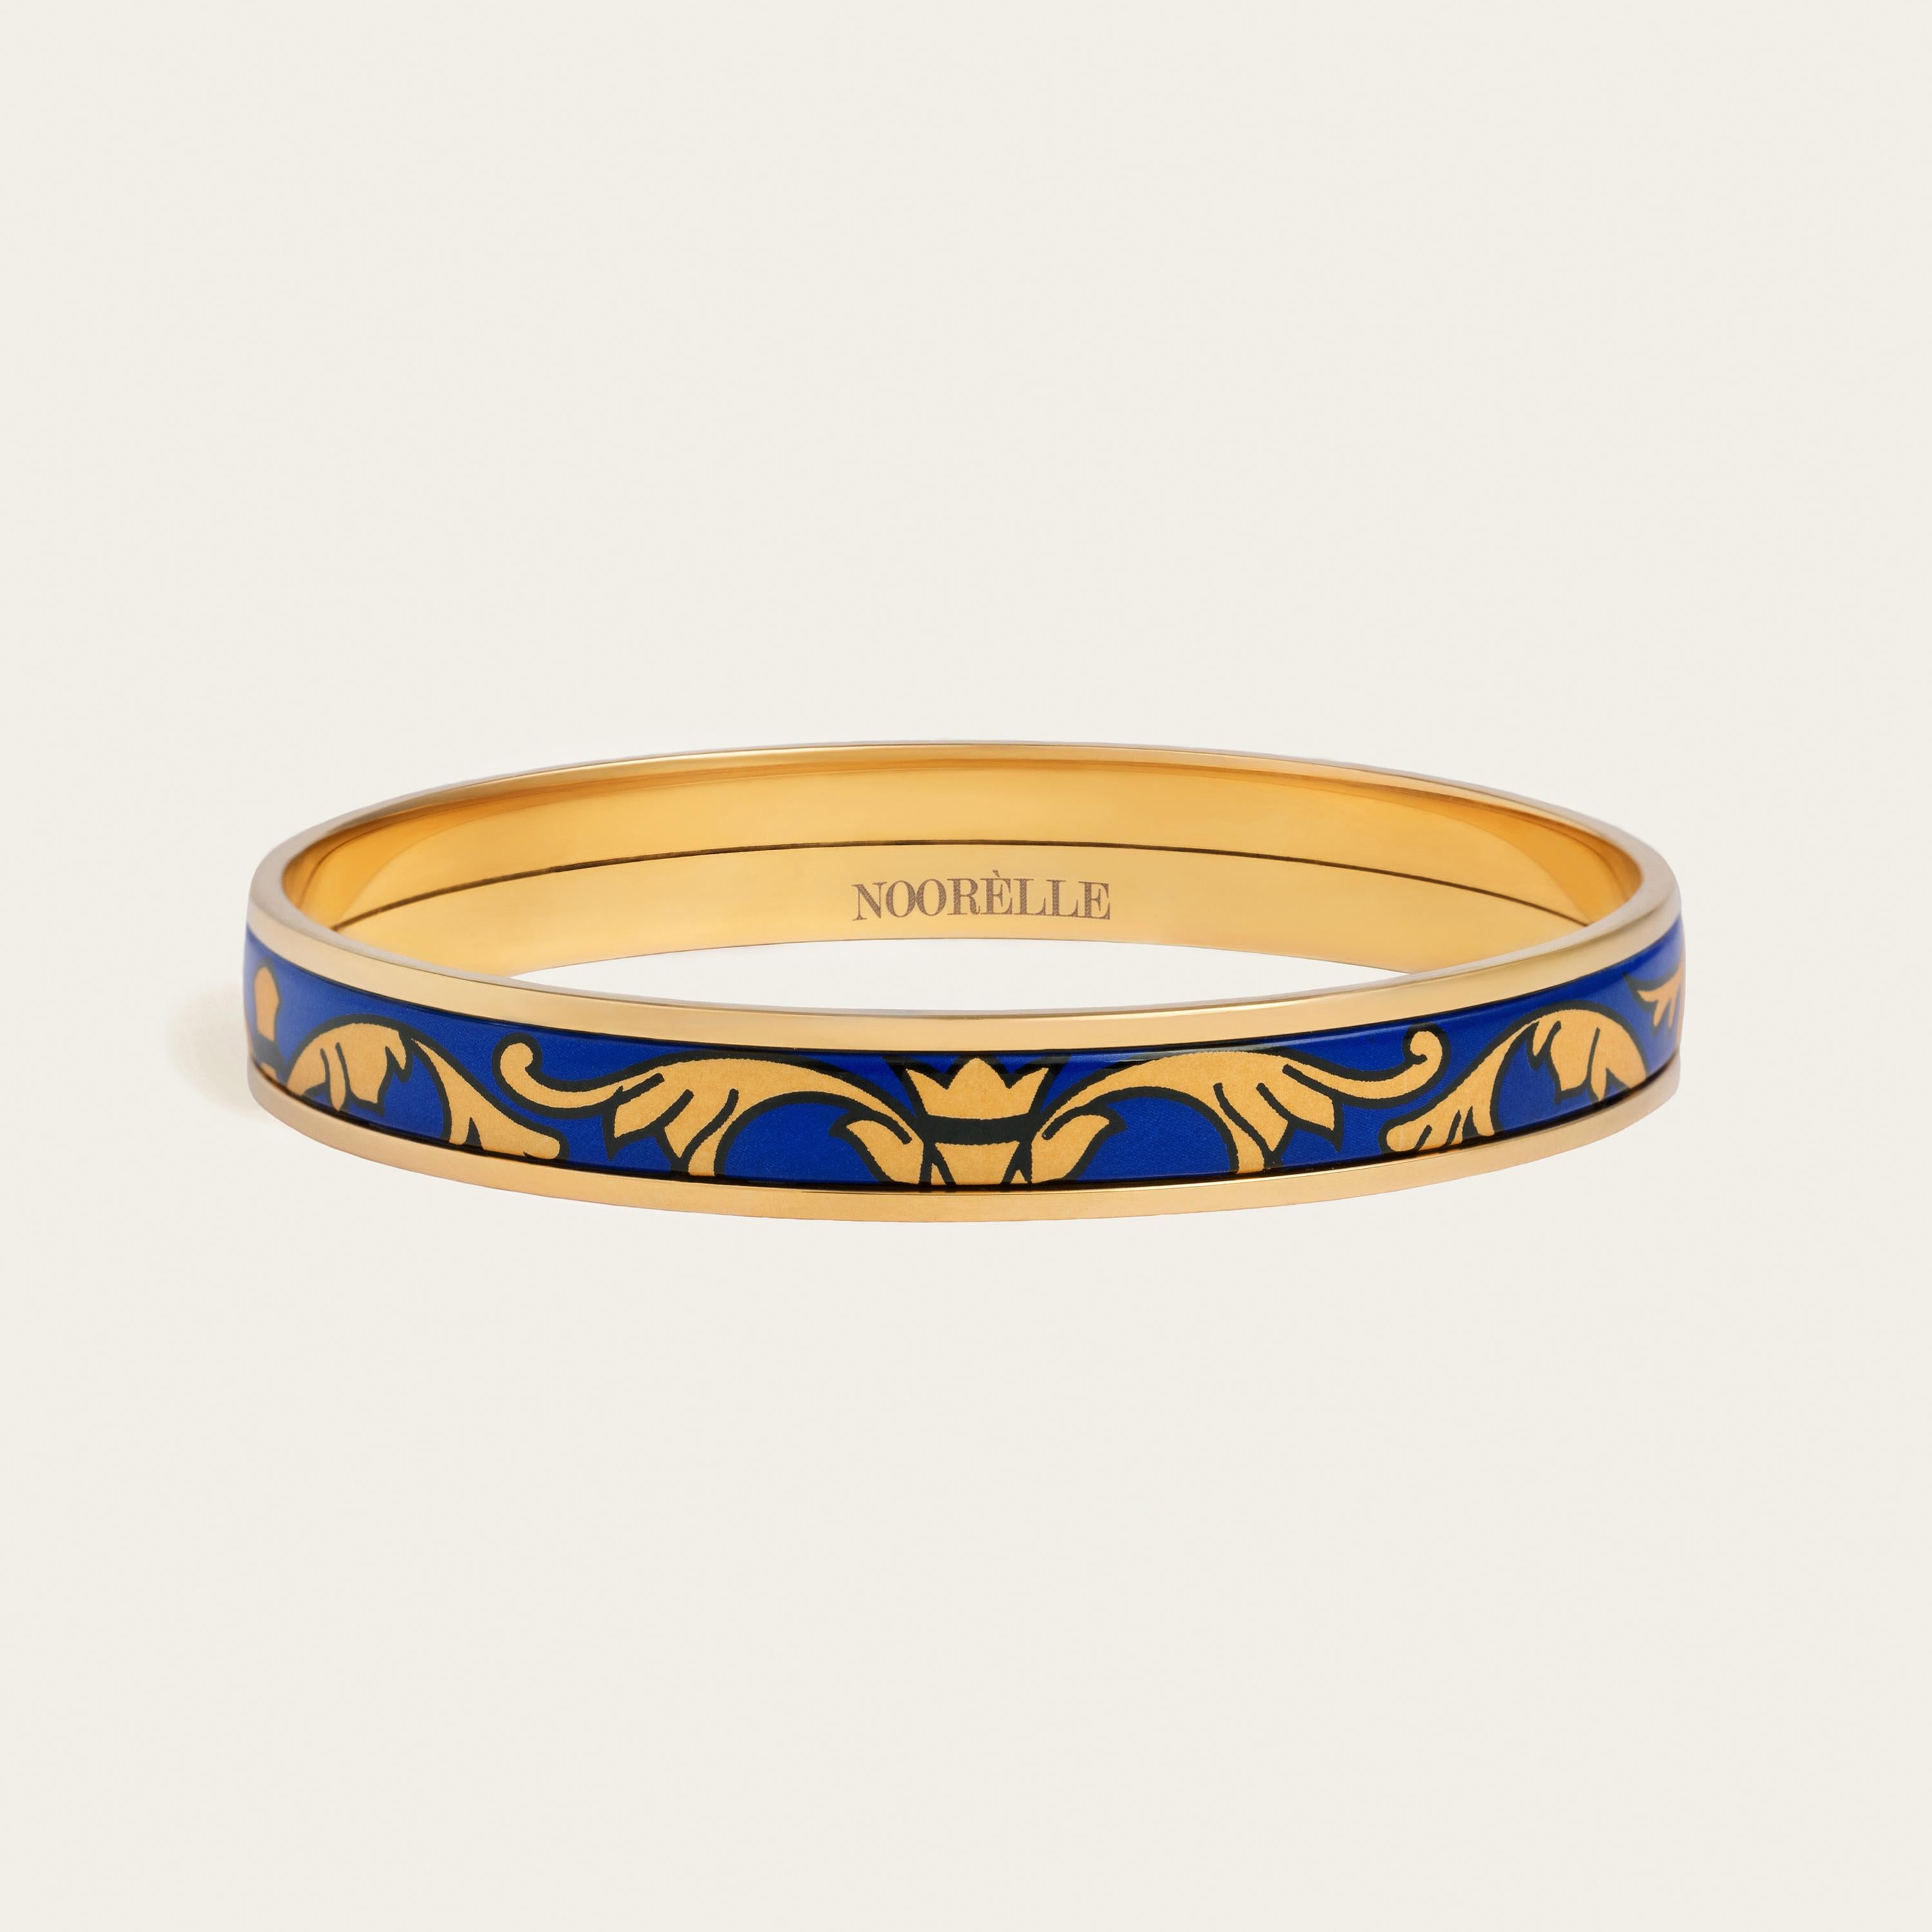 Presenting our Elle Bangle Miss. Elevate your style with our exquisite 18k gold-plated stainless steel bangle. Hand-painted with genuine fire enamel in vivid colors that will last forever, this luxurious piece is designed to make a statement.